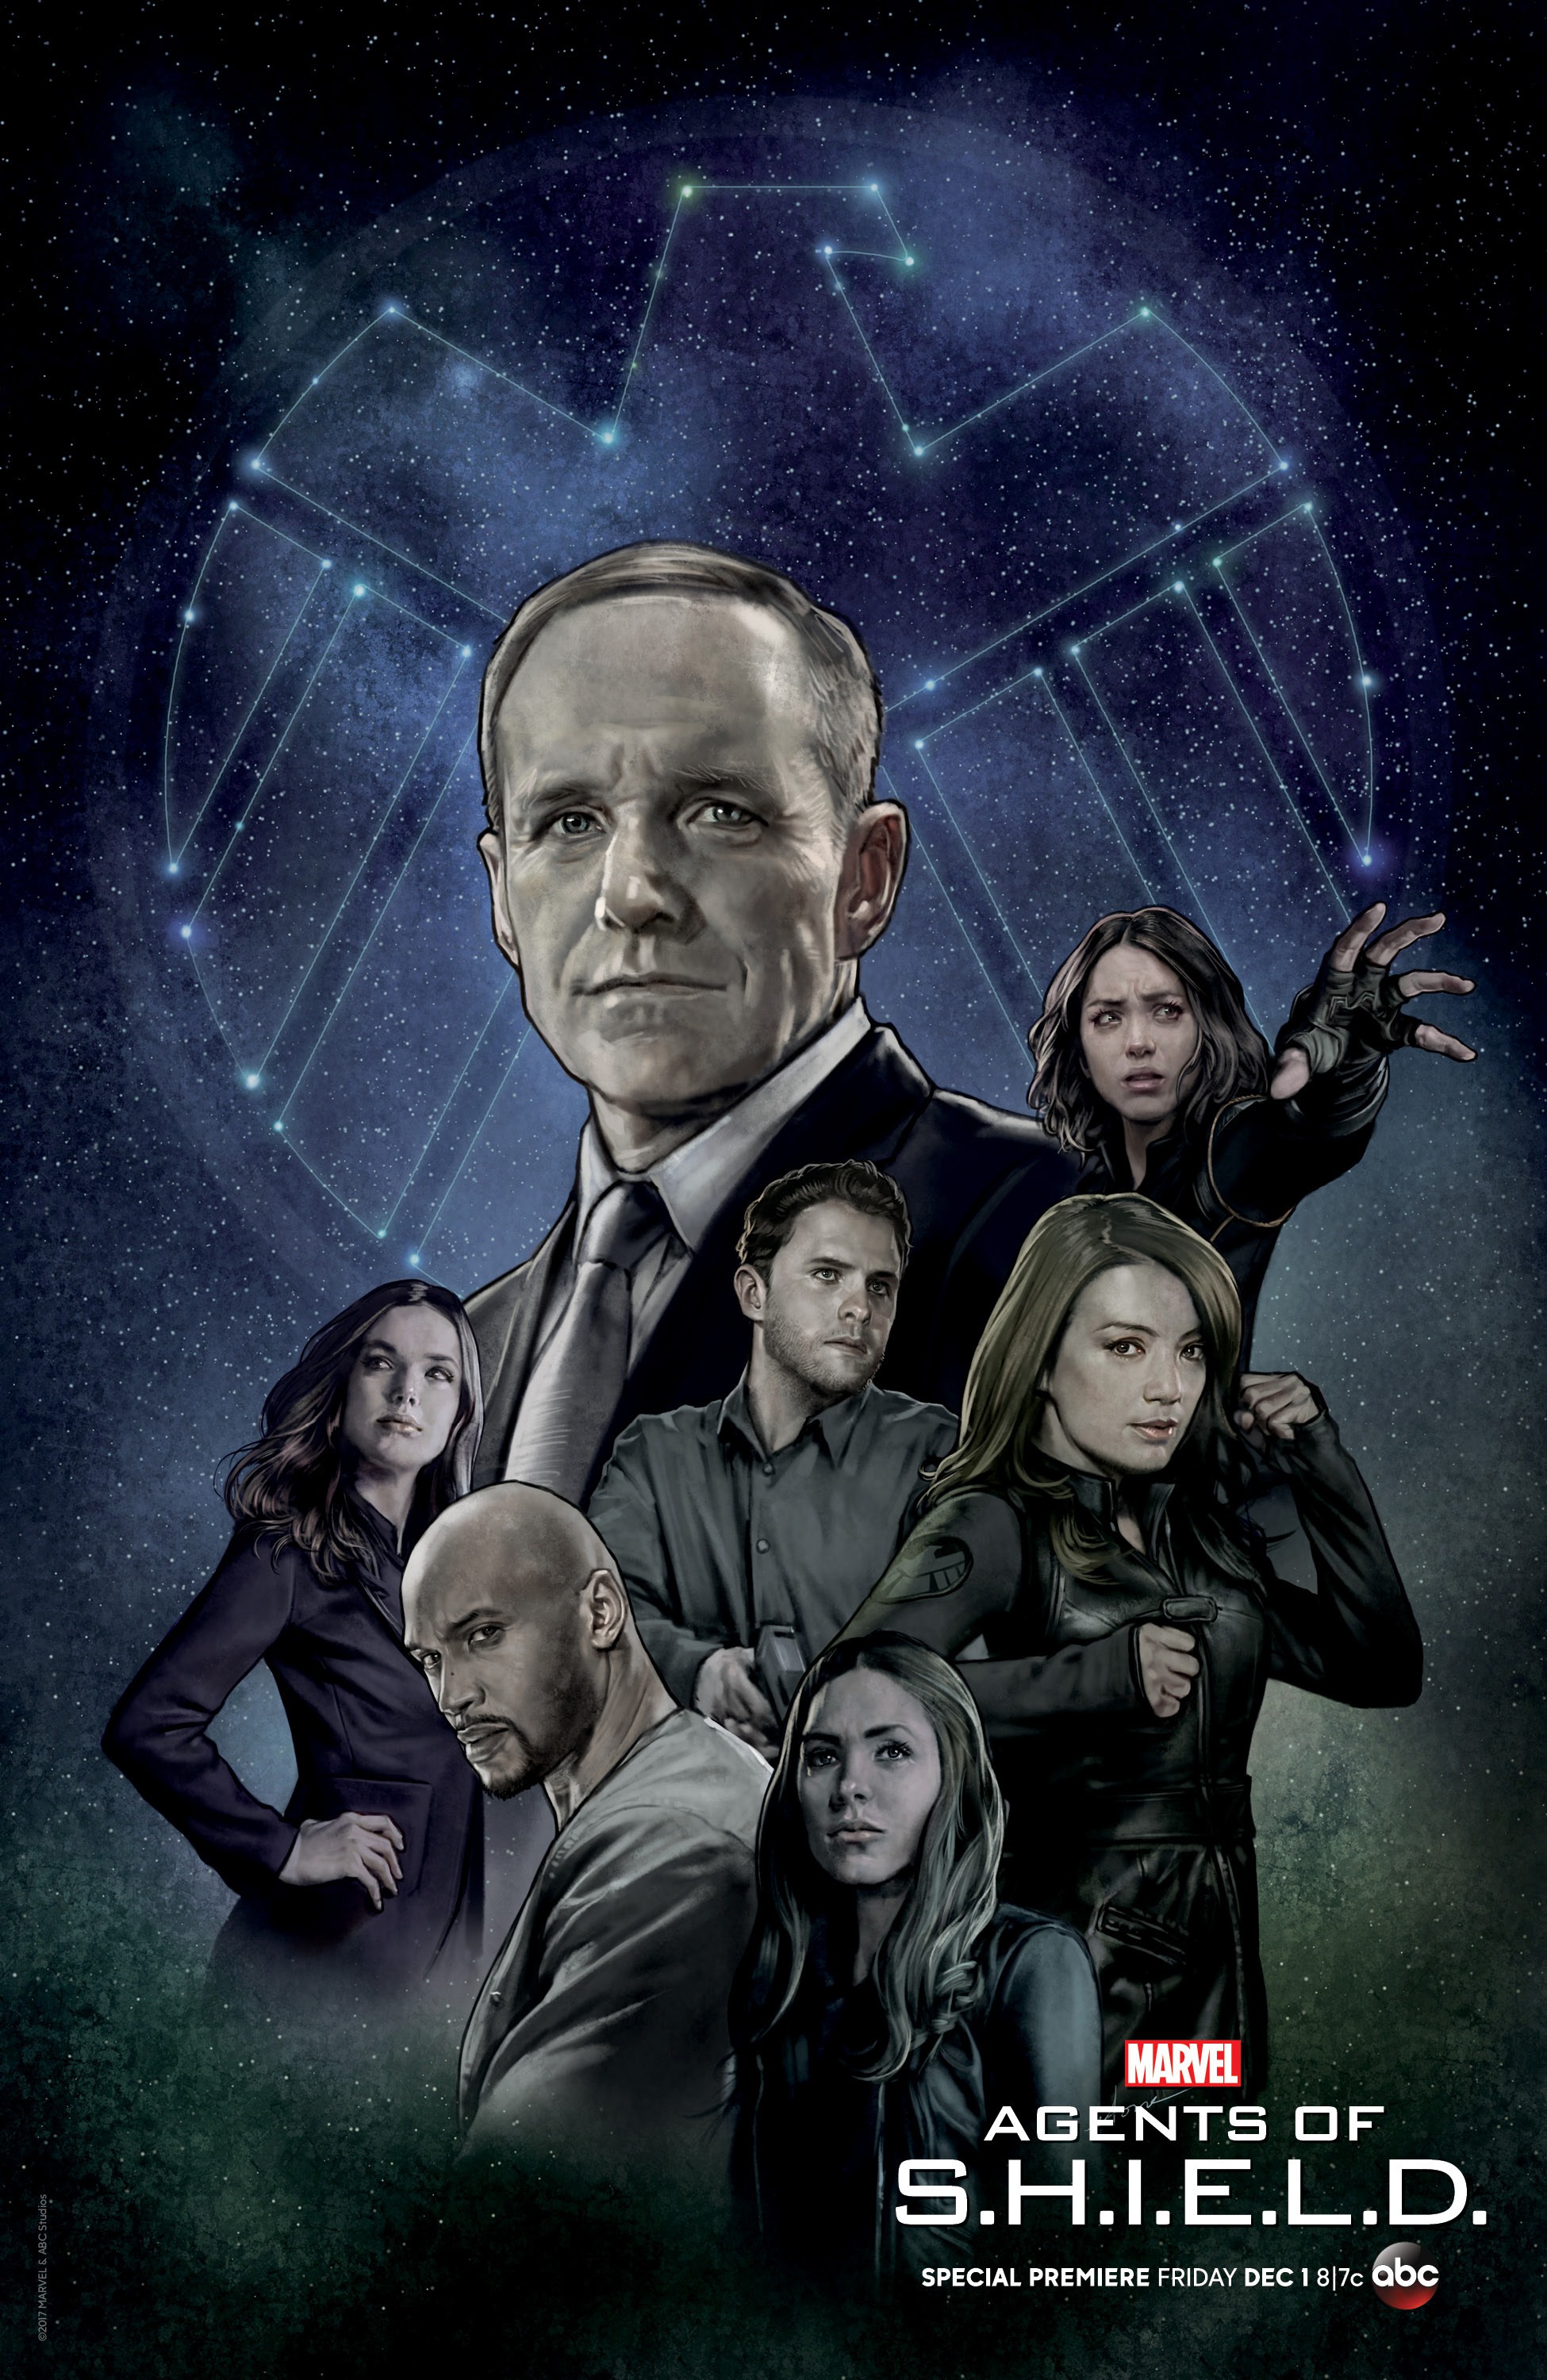 Mega Sized TV Poster Image for Agents of S.H.I.E.L.D. (#17 of 27)